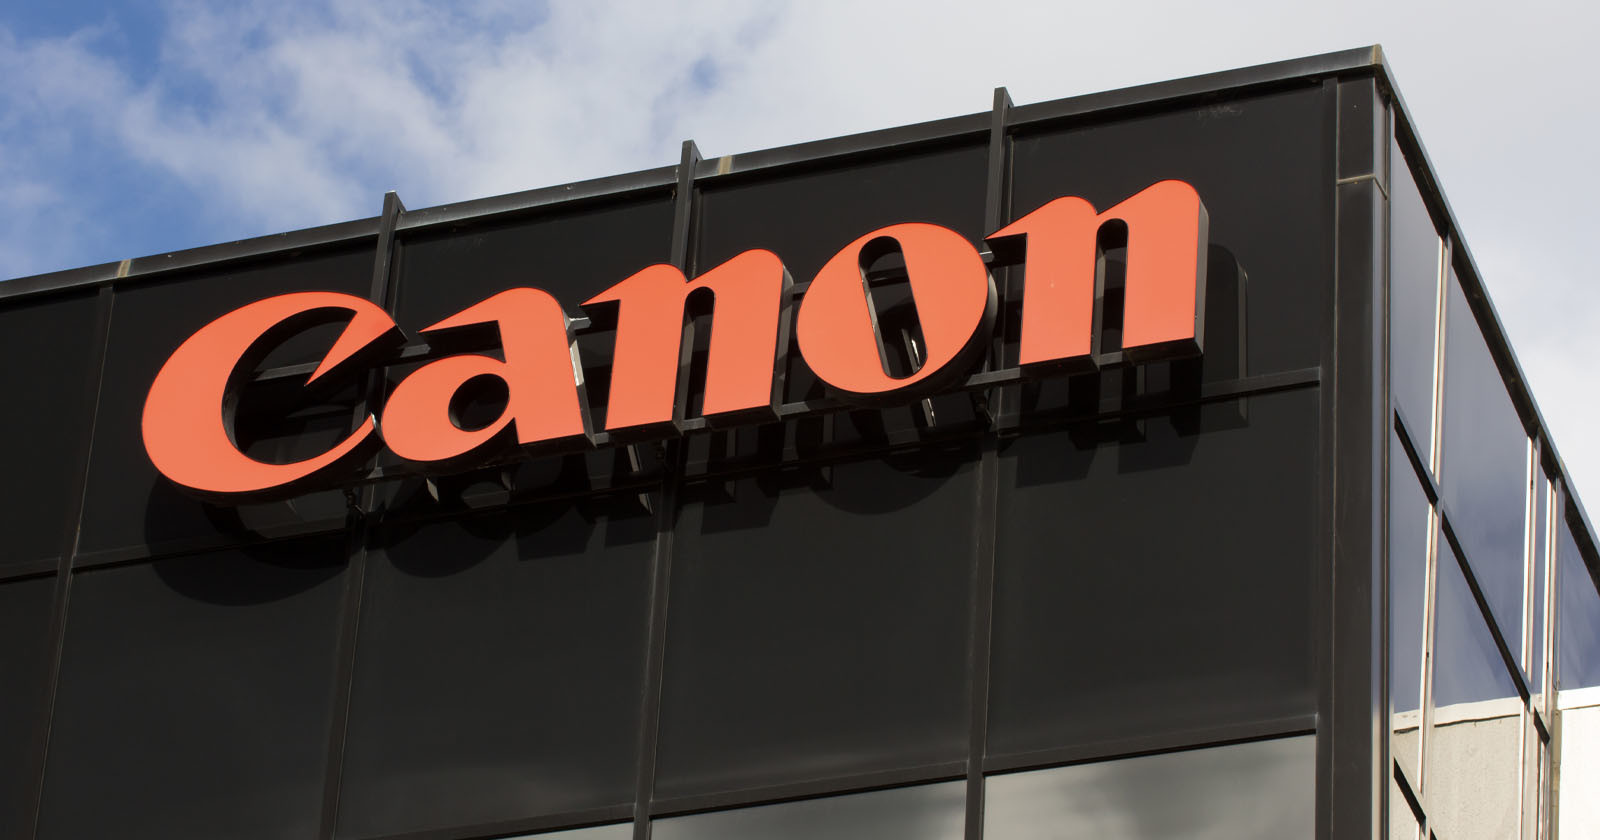  canon confirms going after lens makers patent 